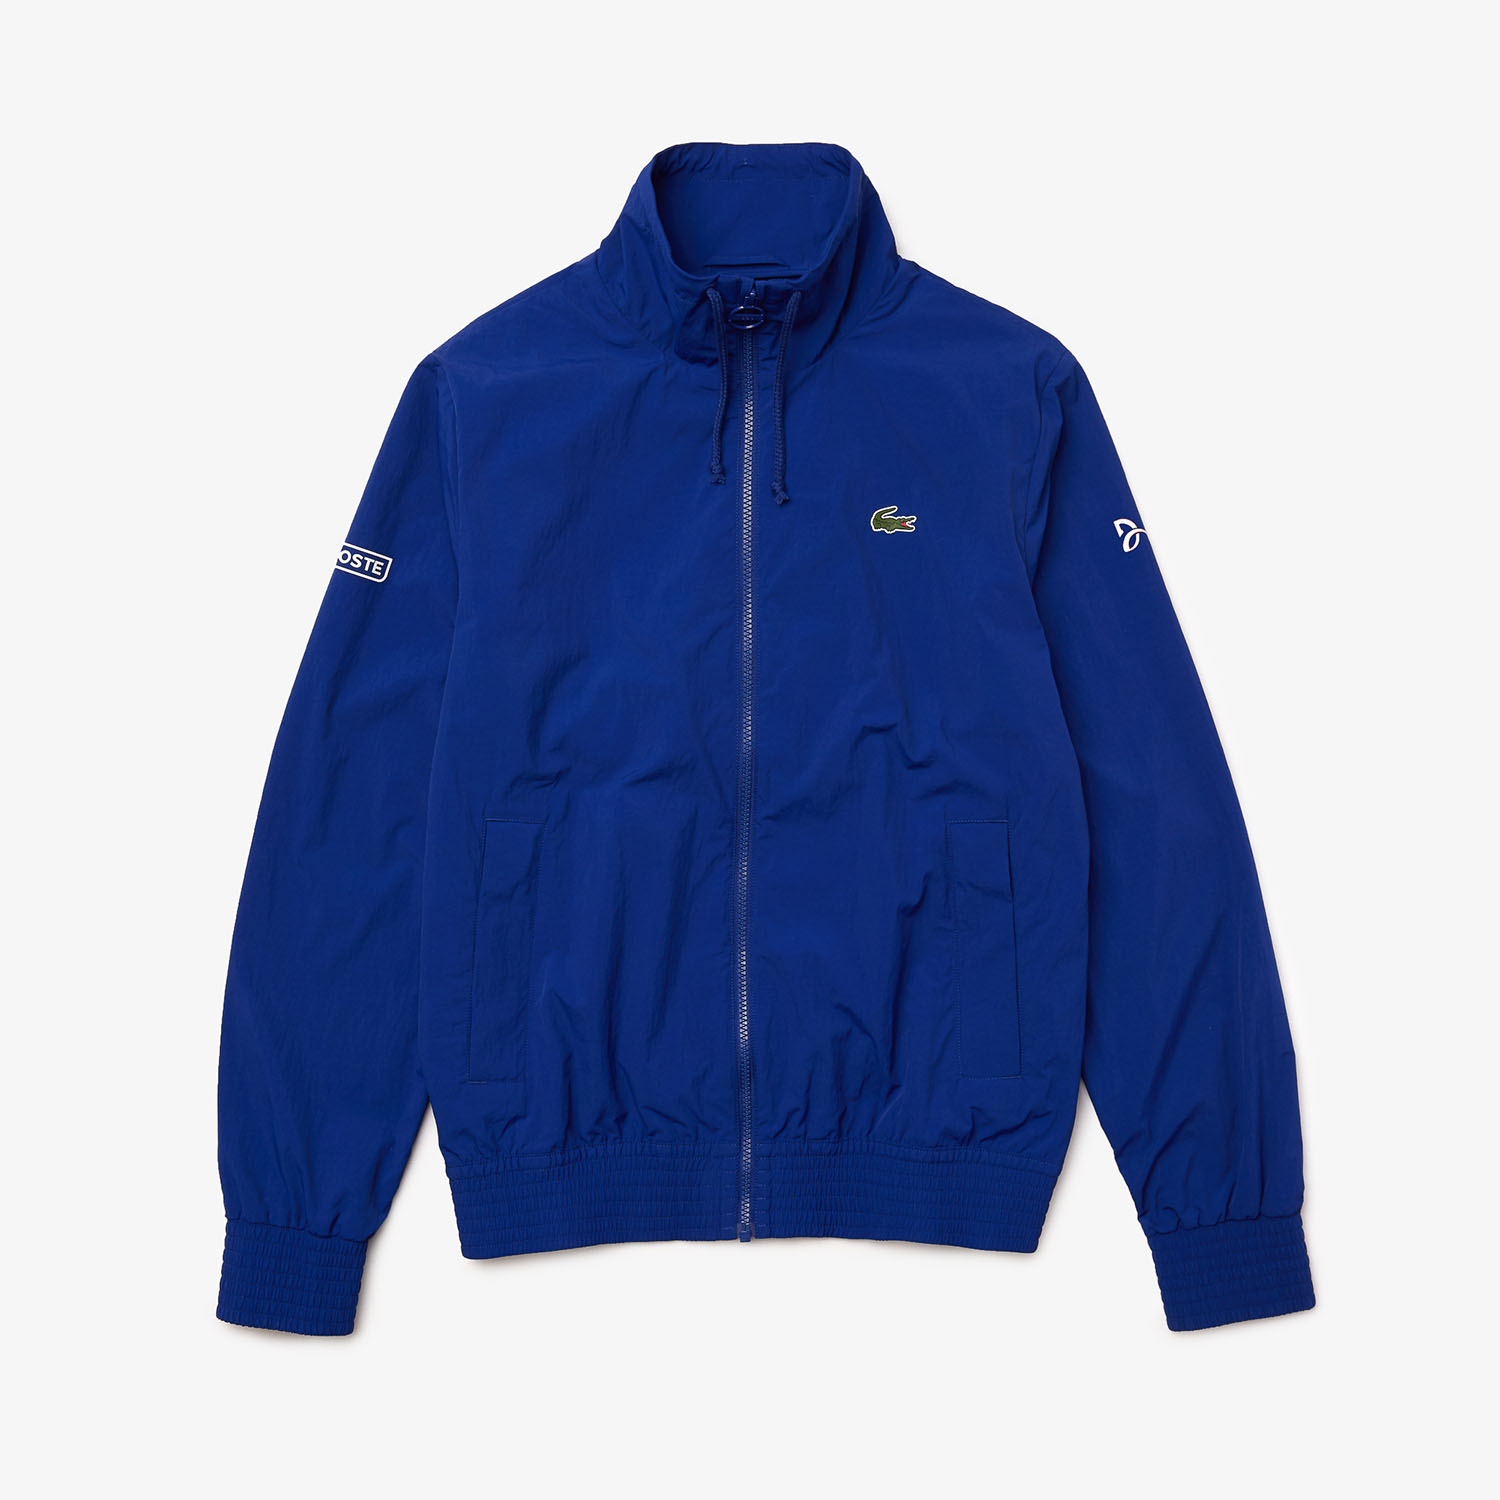 Lacoste Mens ND Jacket - Blue » Wigmore Sports